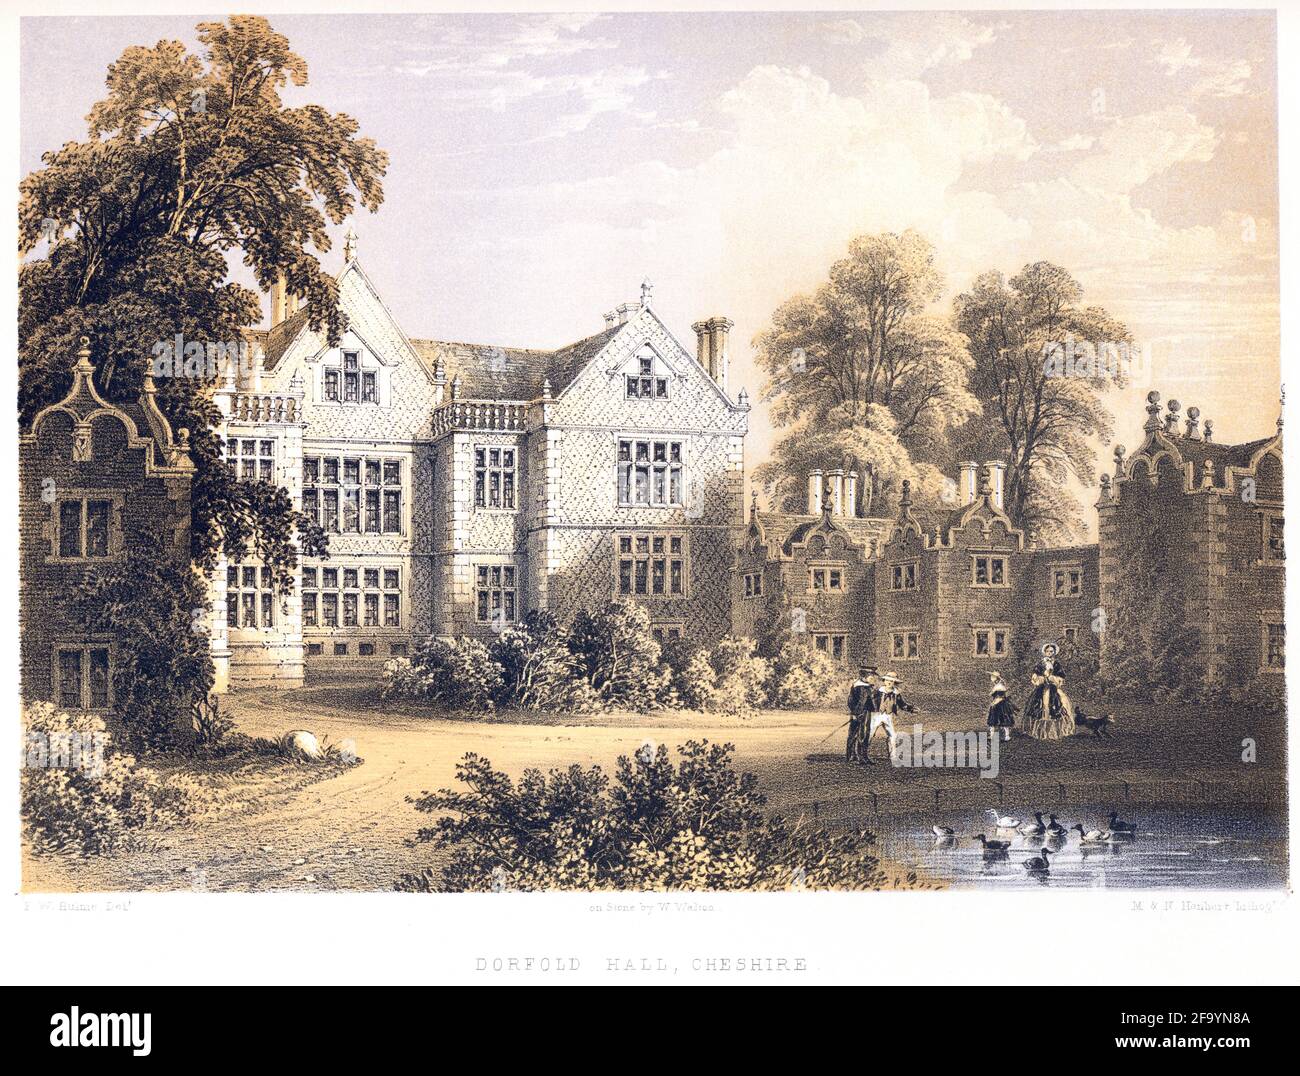 A lithotint of Dorfold Hall, Cheshire scanned at high resolution from a book printed in 1858. Believed copyright free. Stock Photo